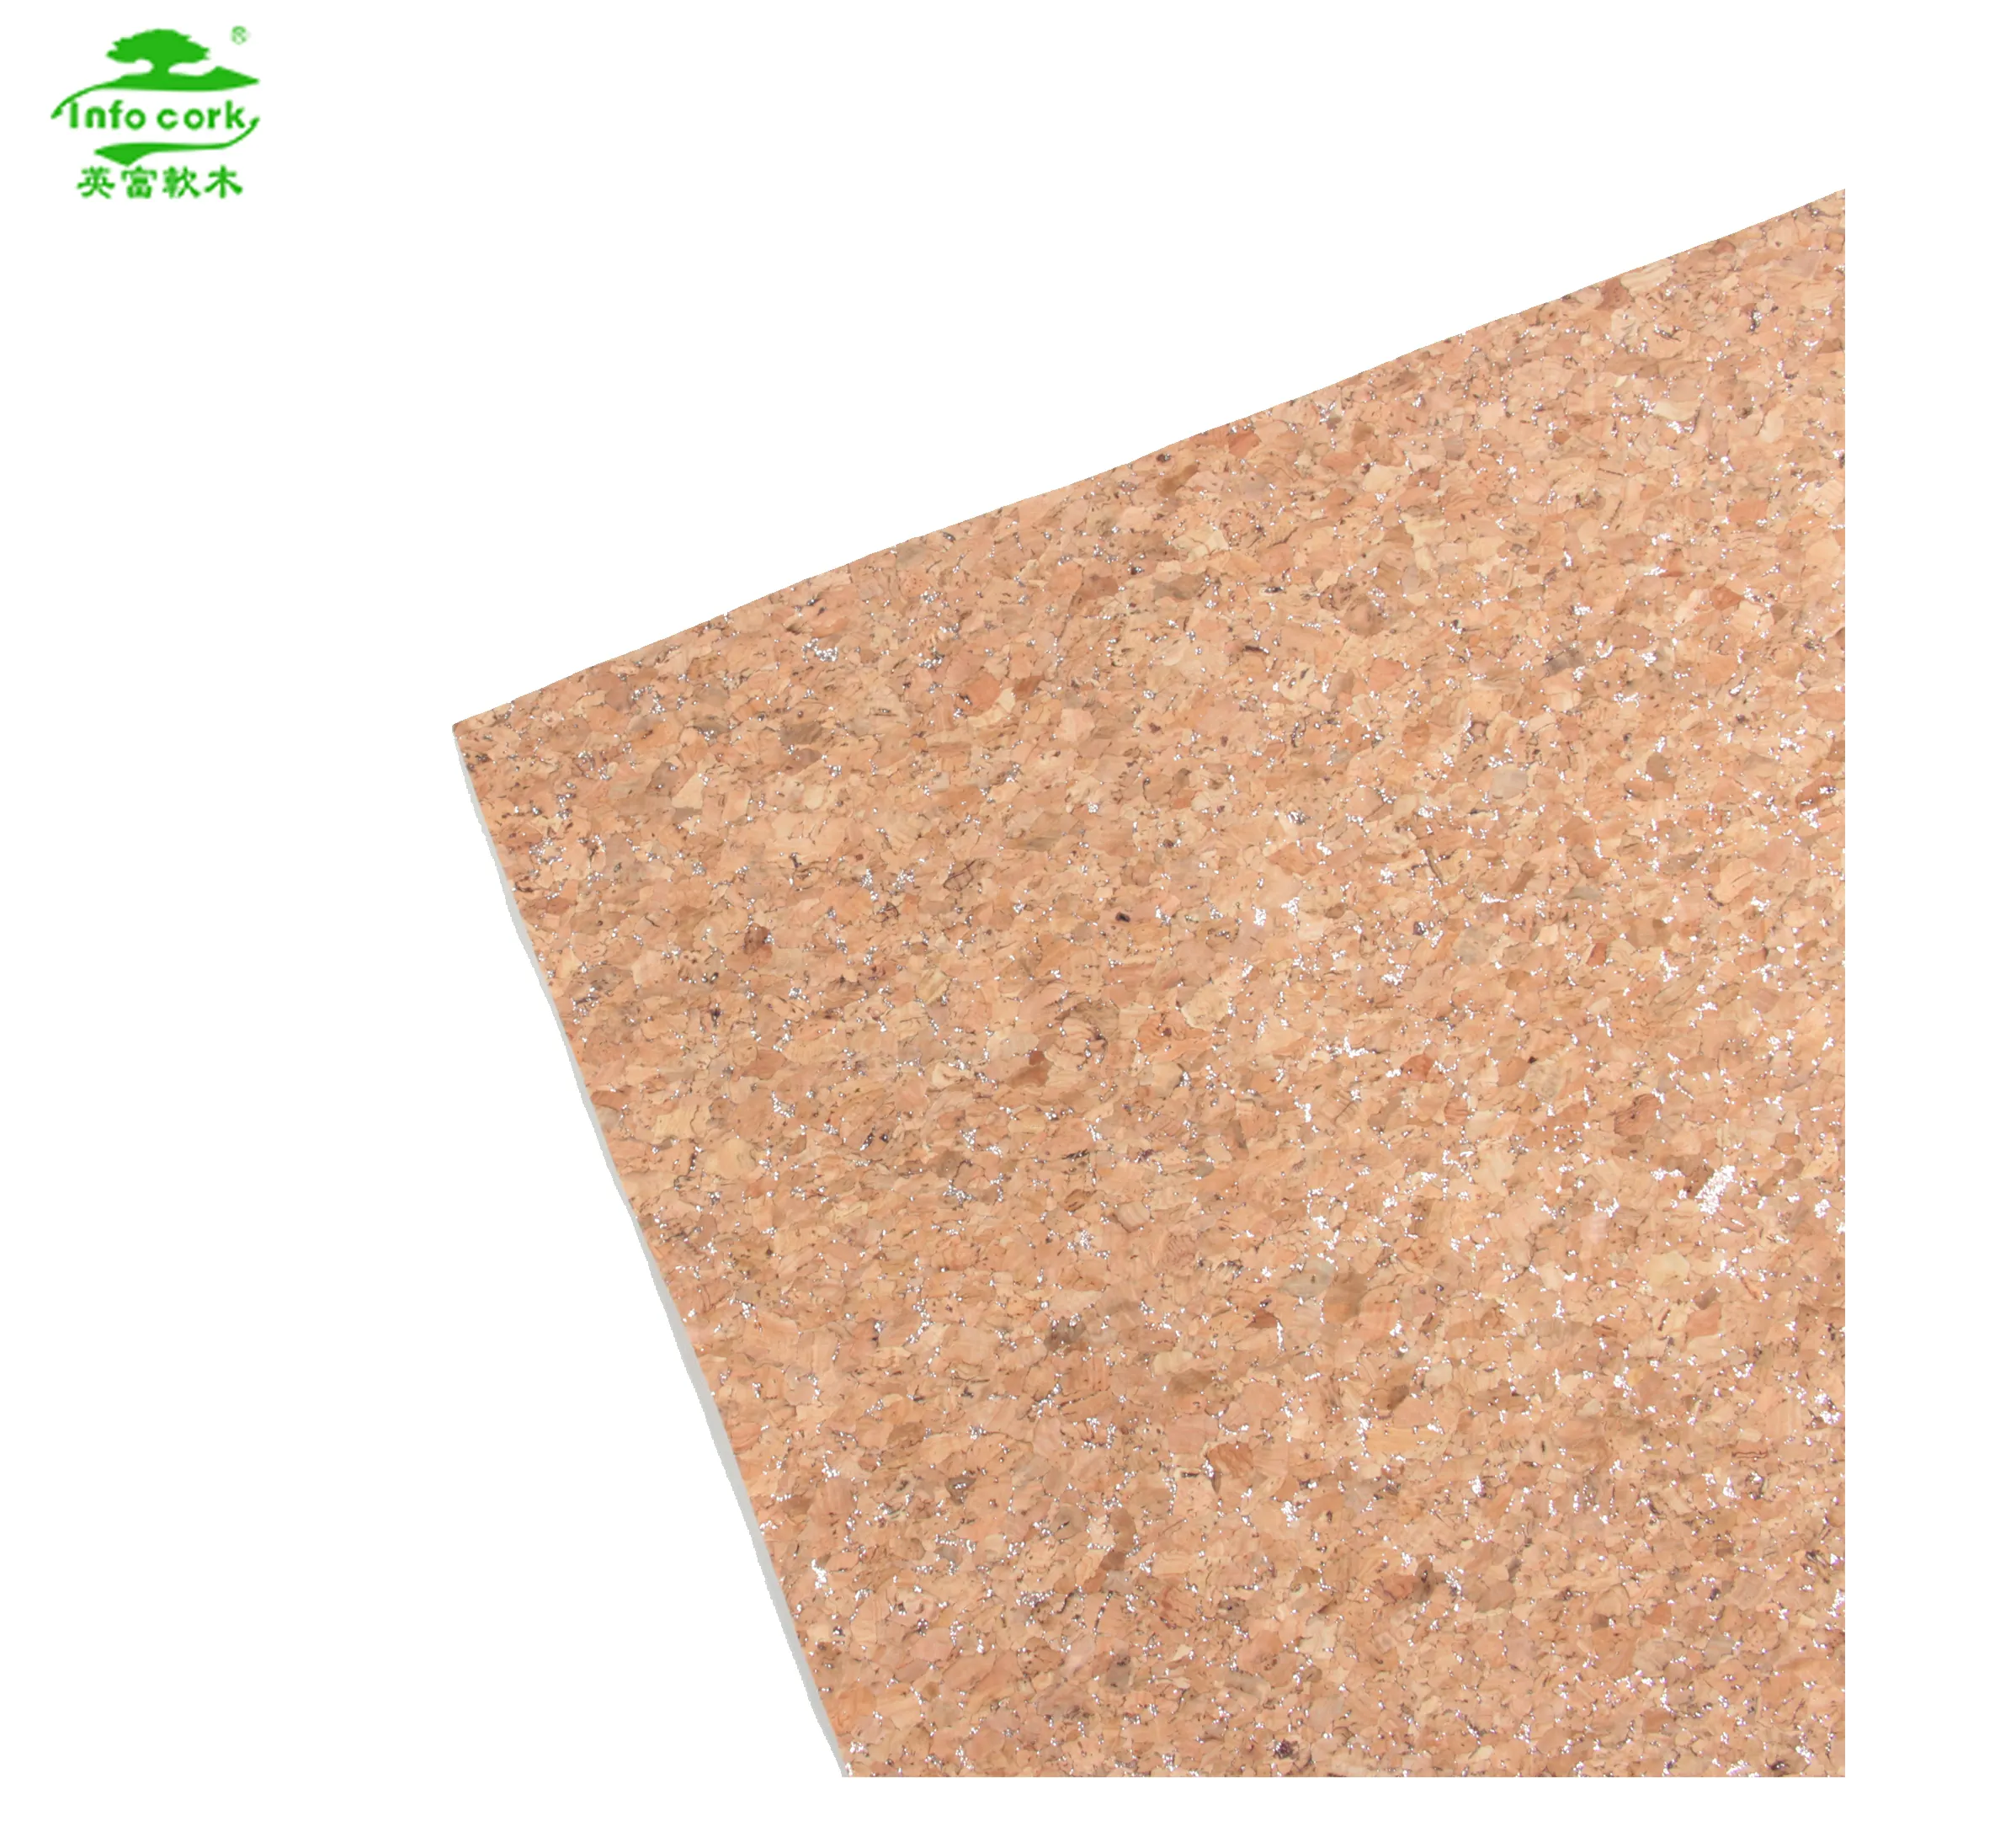 Portugal Cork Material Leather Natural Stones In Gold Glitter Dotted Cork Fabric For Bags Covers